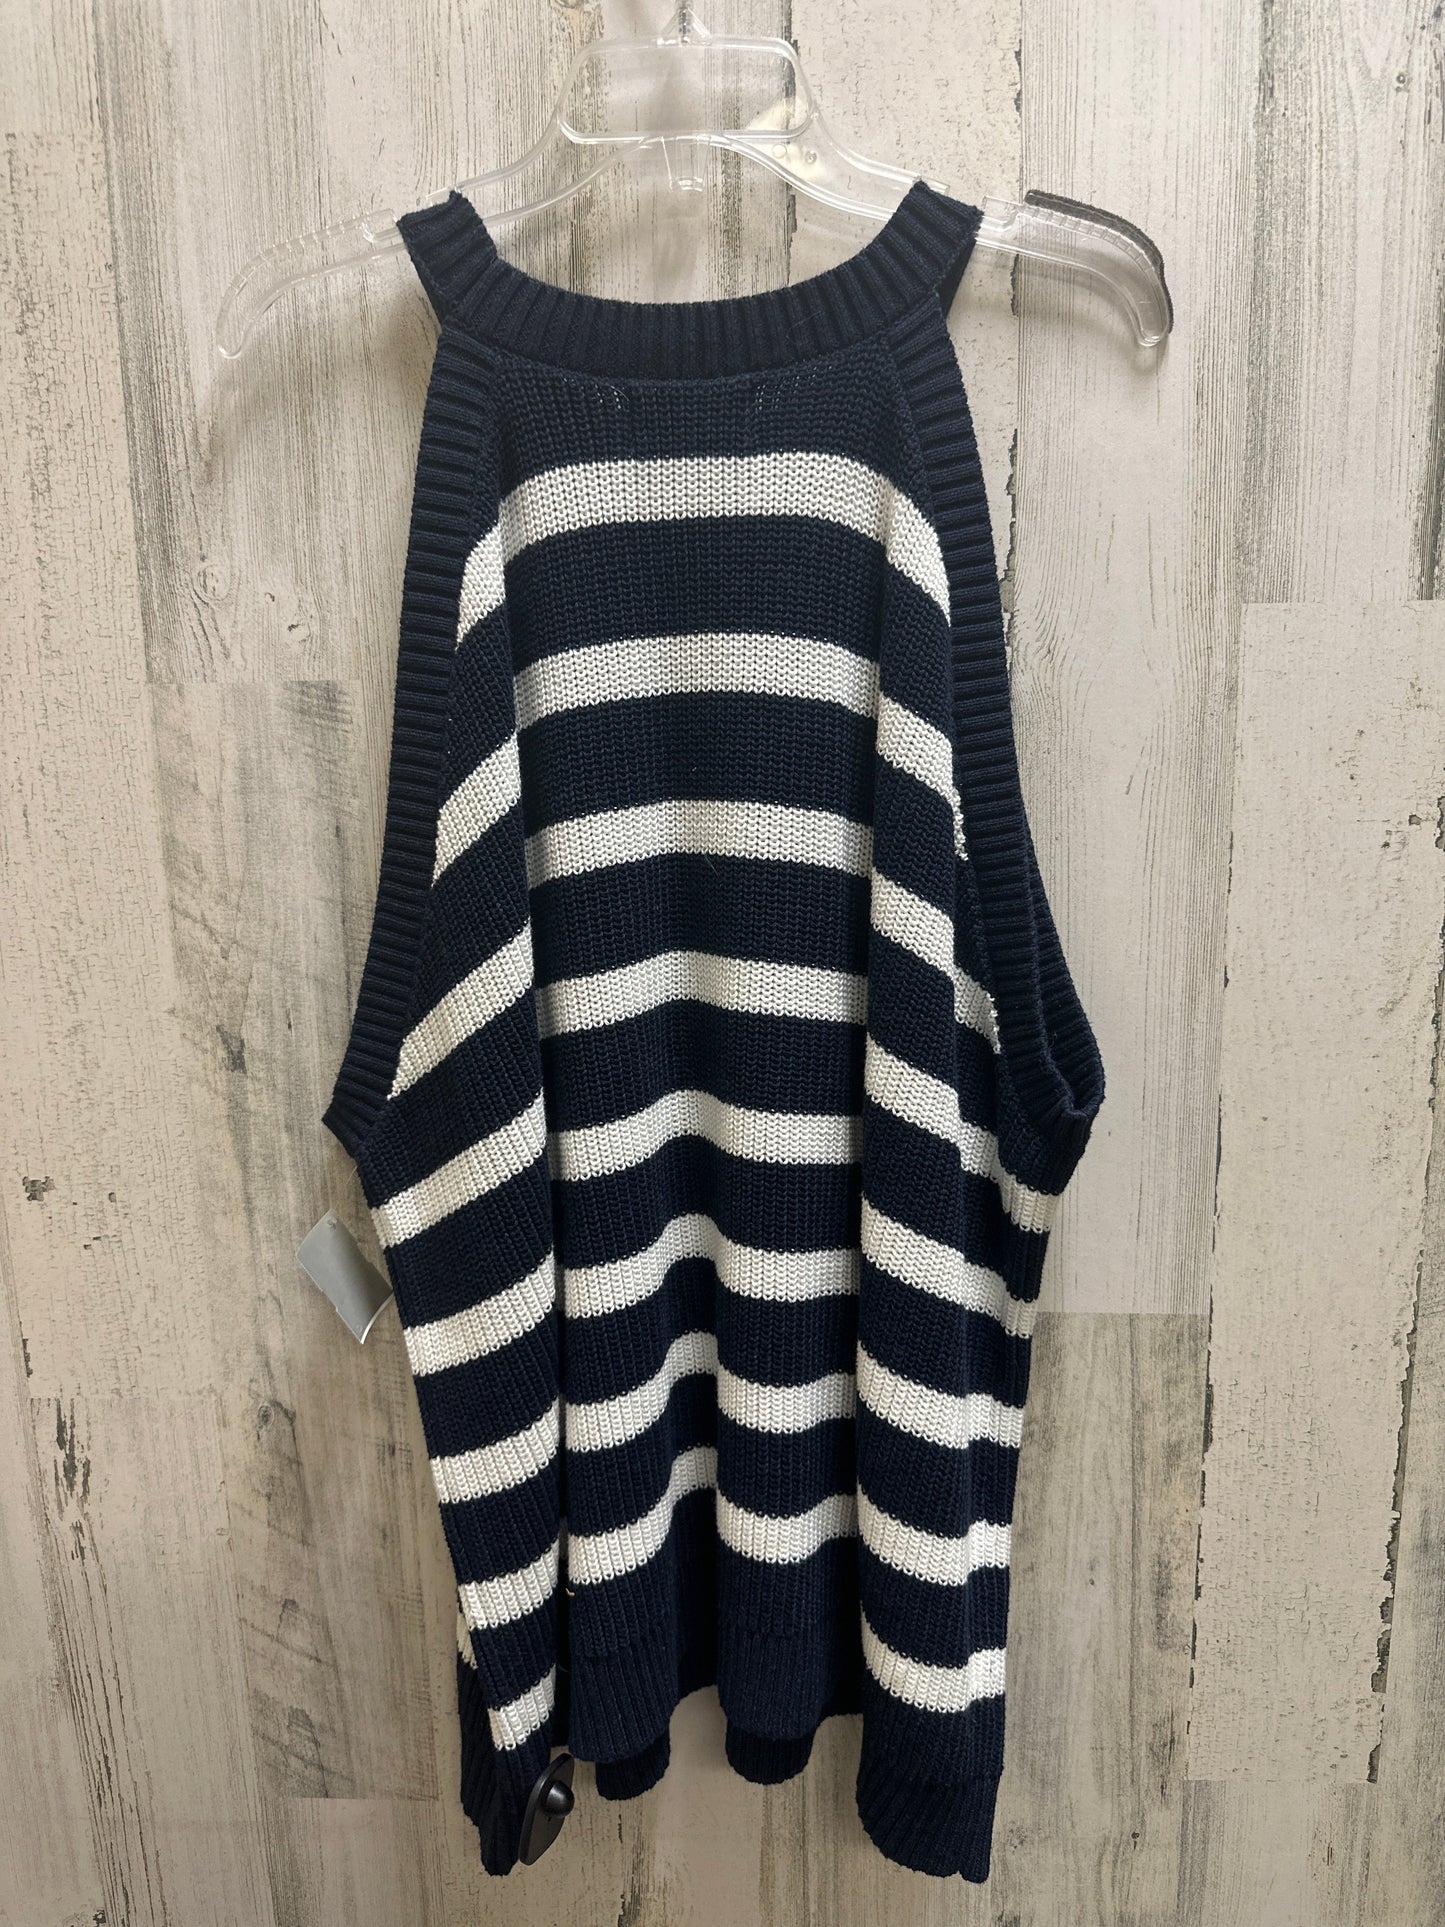 Top Sleeveless By Old Navy  Size: 4x